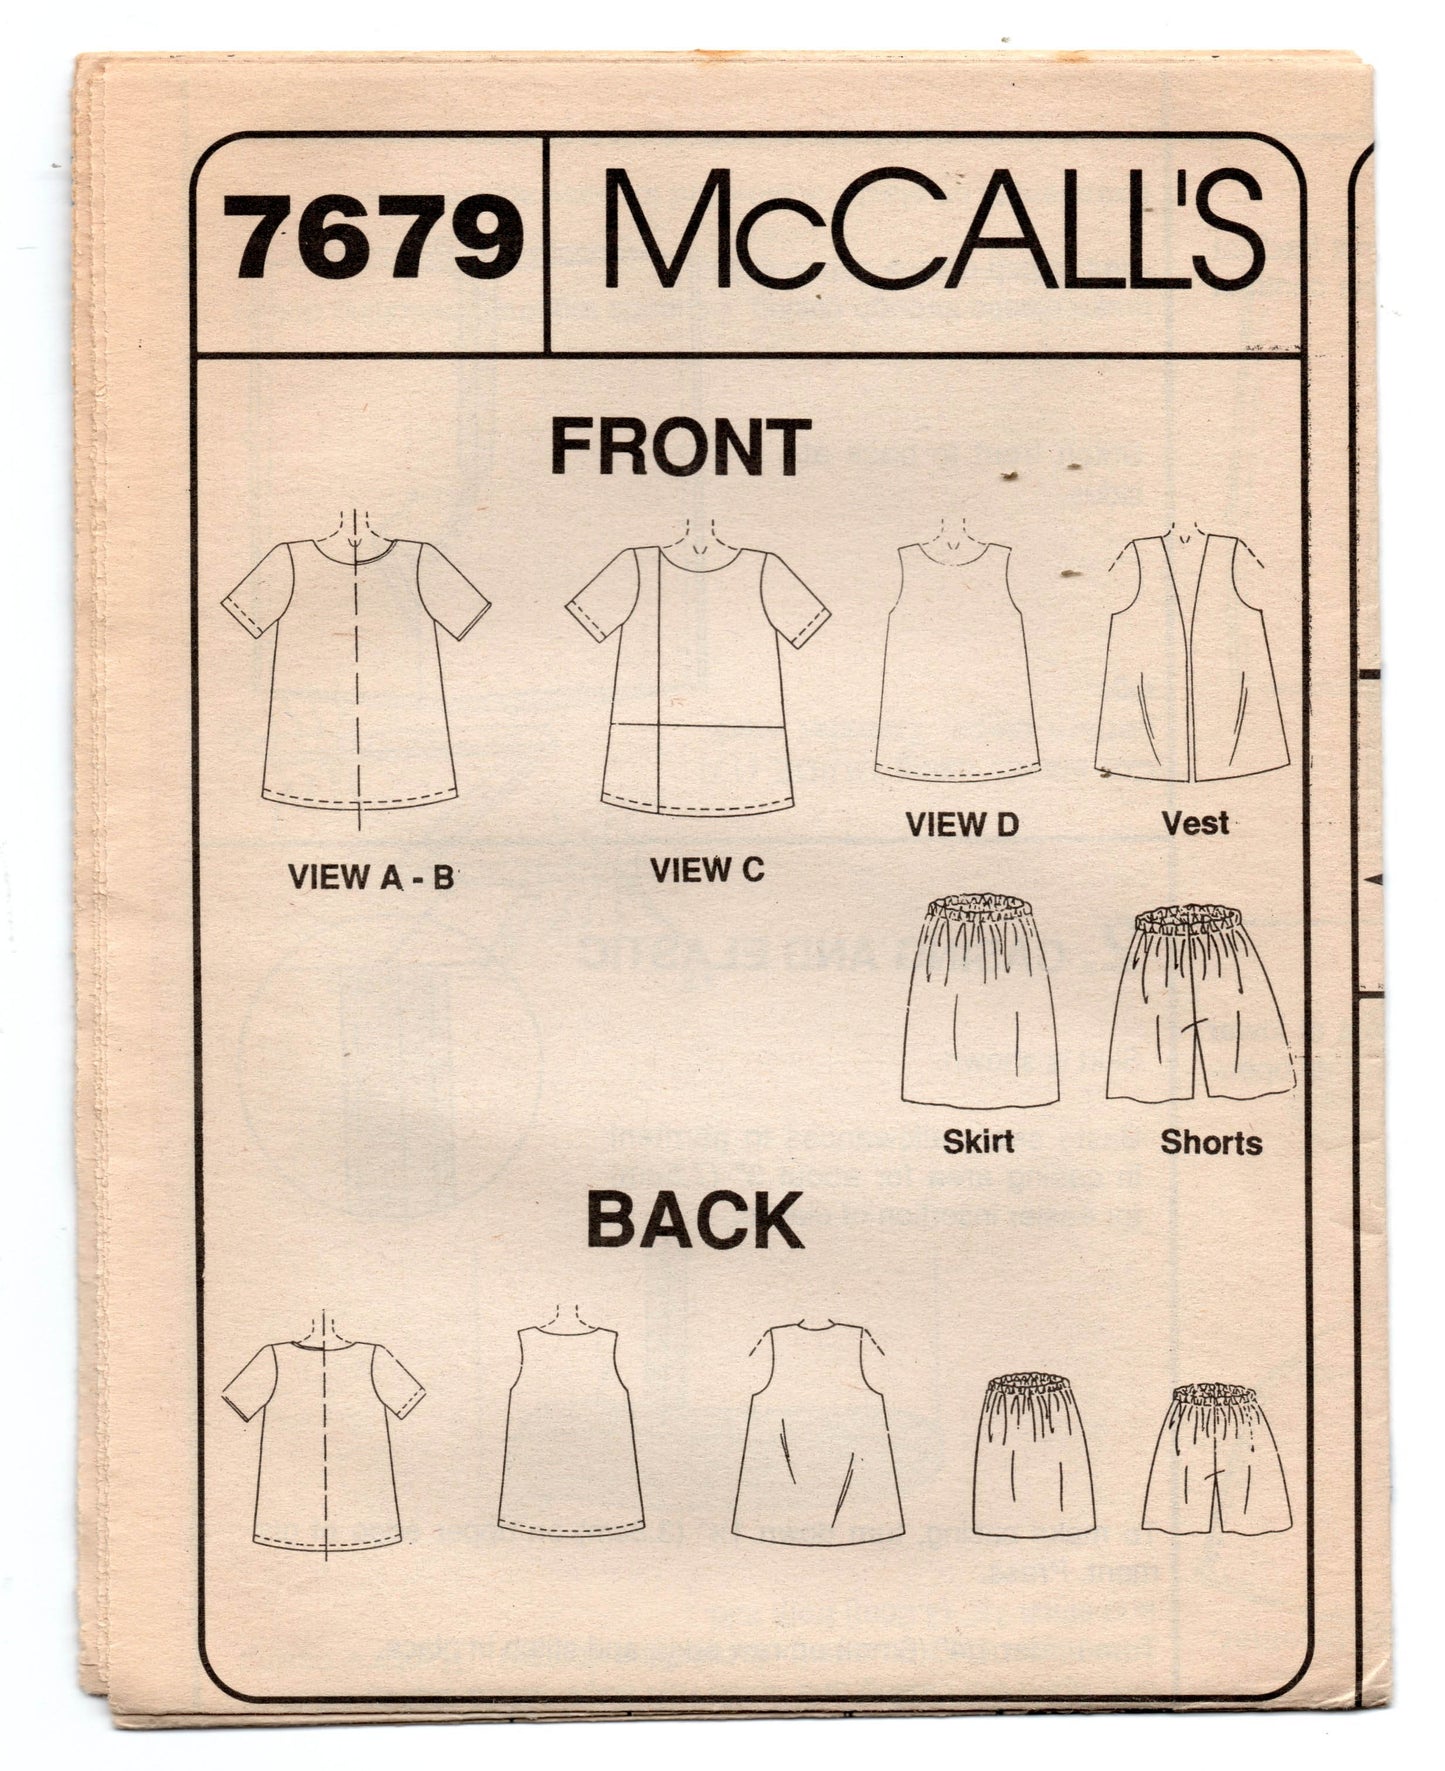 McCall's 7679 Womens Maternity Vest Top Skirt & Shorts 1980s Vintage Sewing Pattern Size 8 - 12 UNCUT Factory Folded